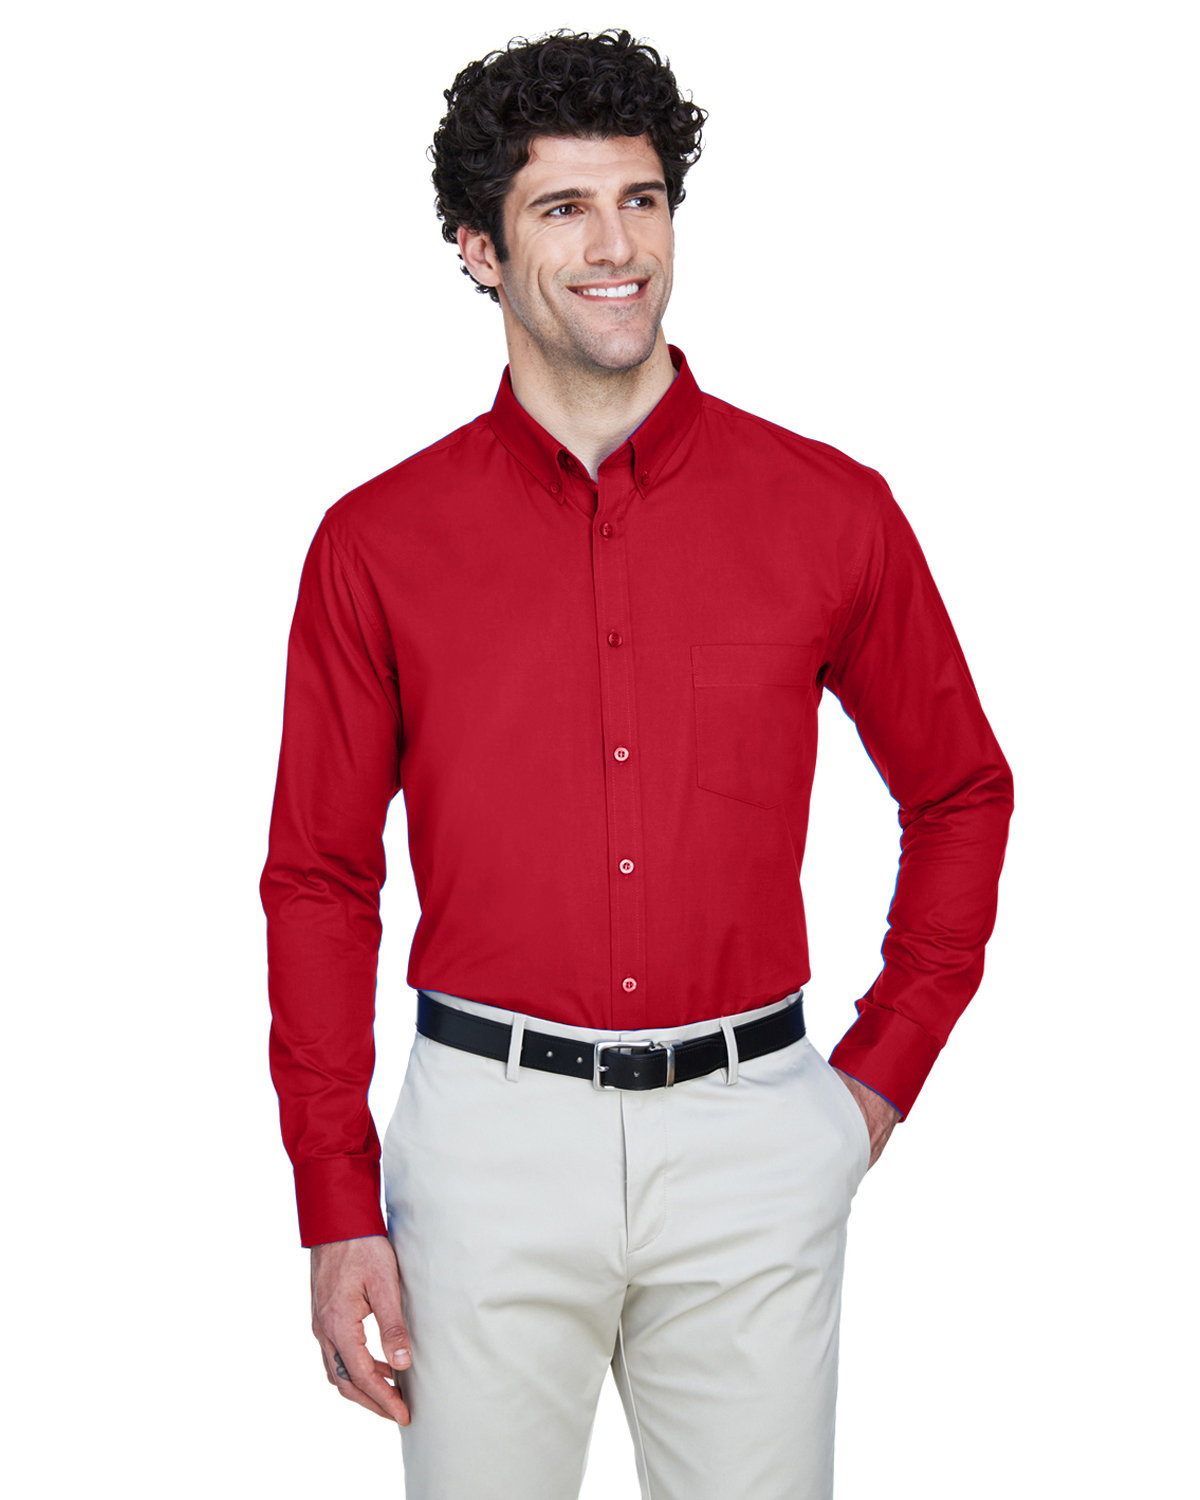 Core365 Men's Operate Long-Sleeve Twill Shirt CLASSIC RED 